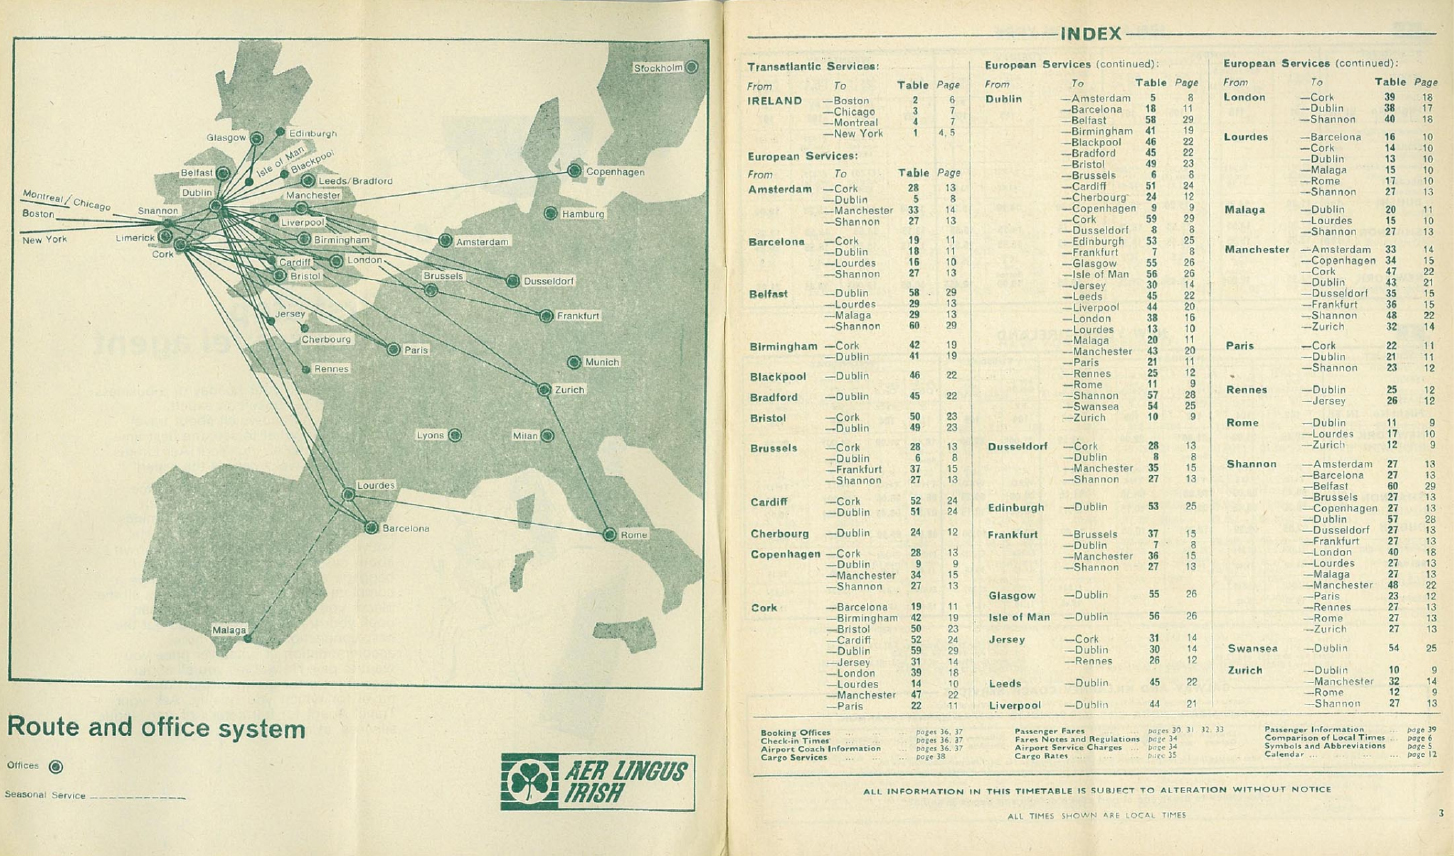 Aer Lingus flight routes in the 1970s